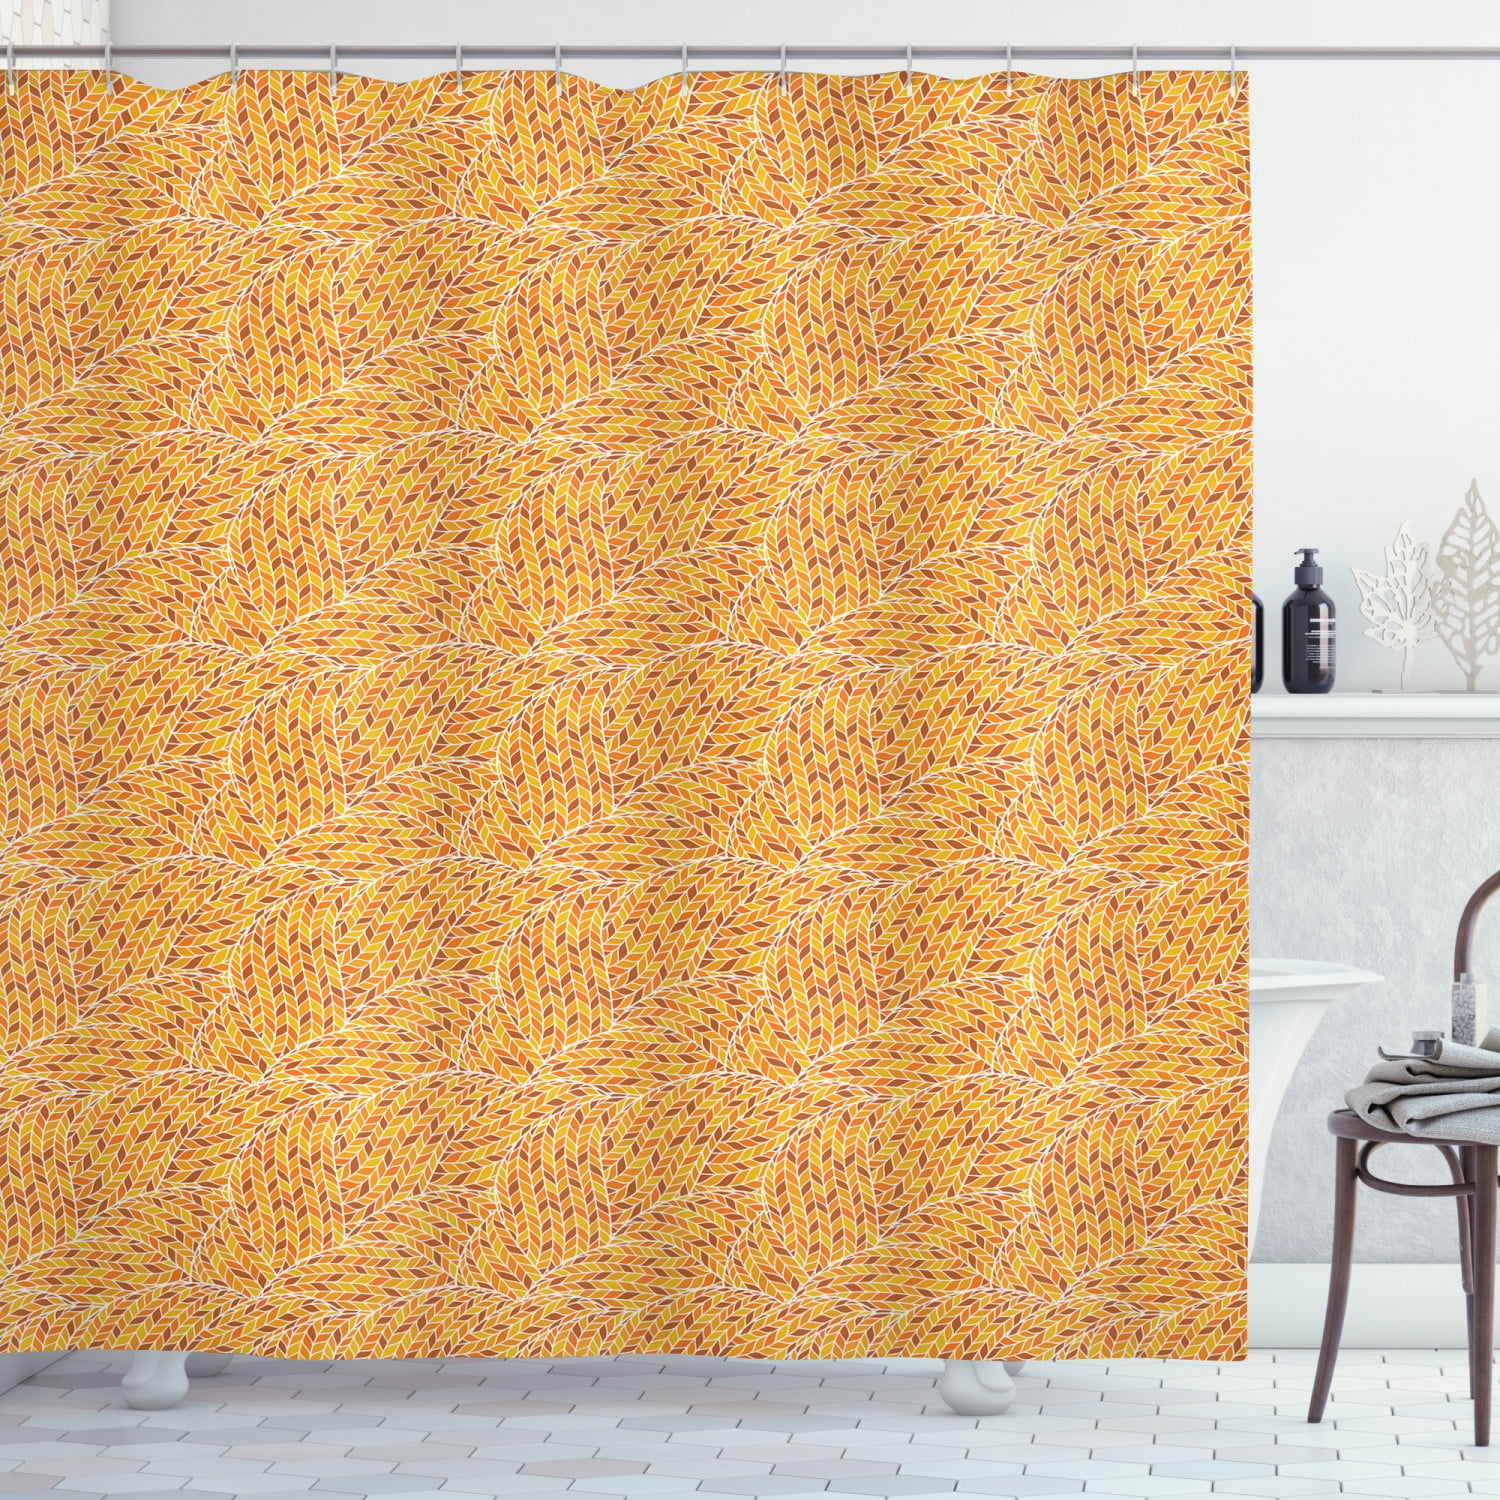 Details about   Earth Tones Shower Curtain Modern Scroll Leaf Print for Bathroom 